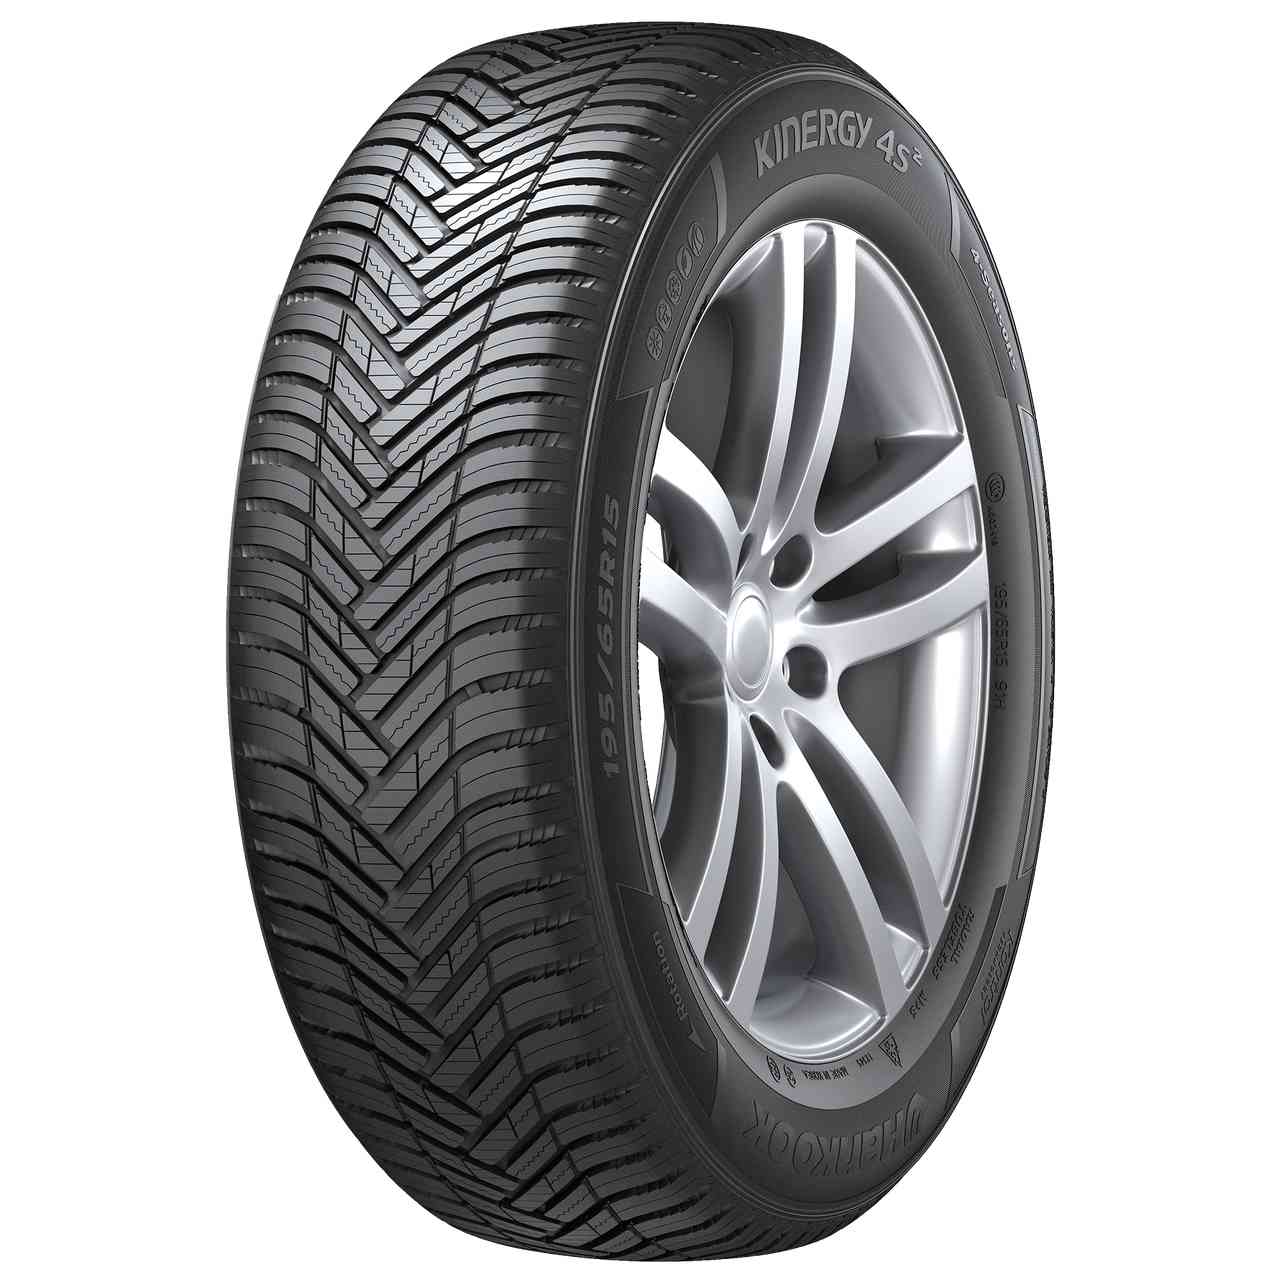 HANKOOK KINERGY 4S 2 (H750) 225/55R18 98V BSW